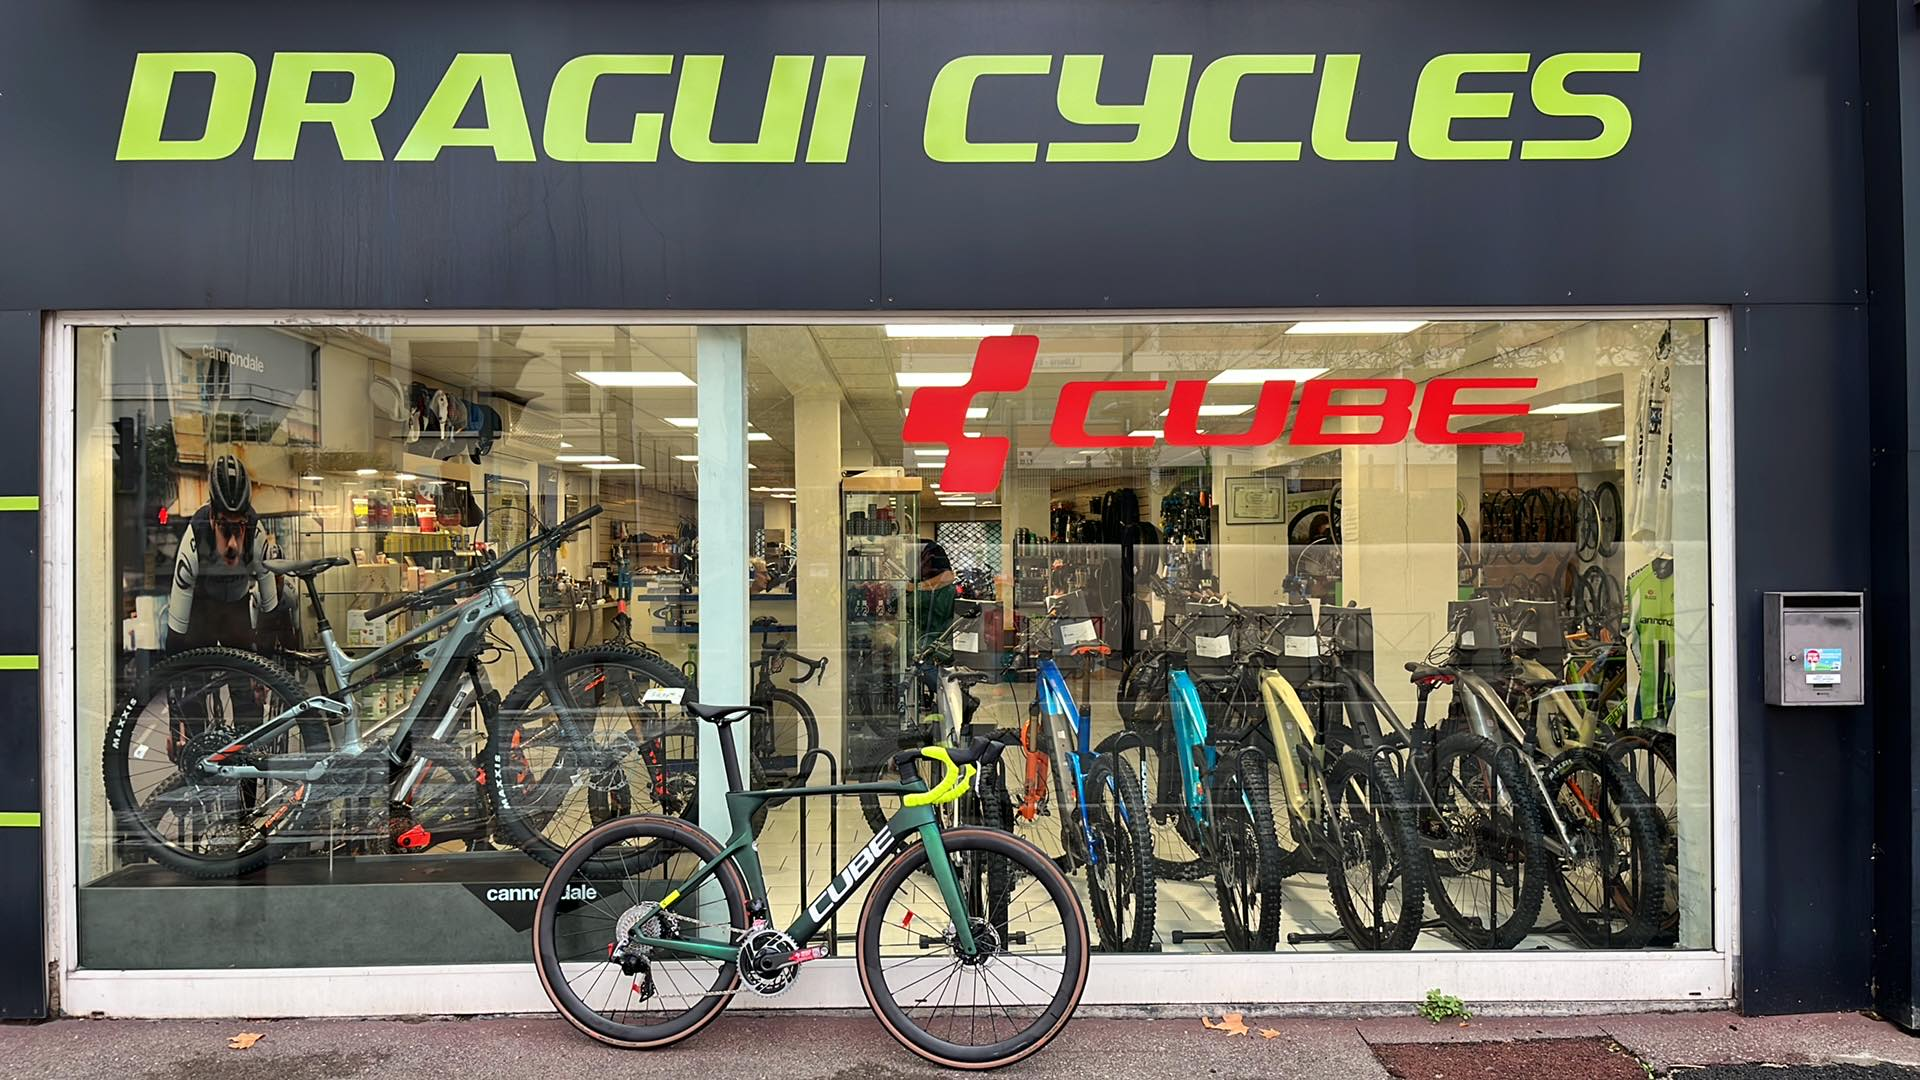 Photo du magasin Dragui cycles